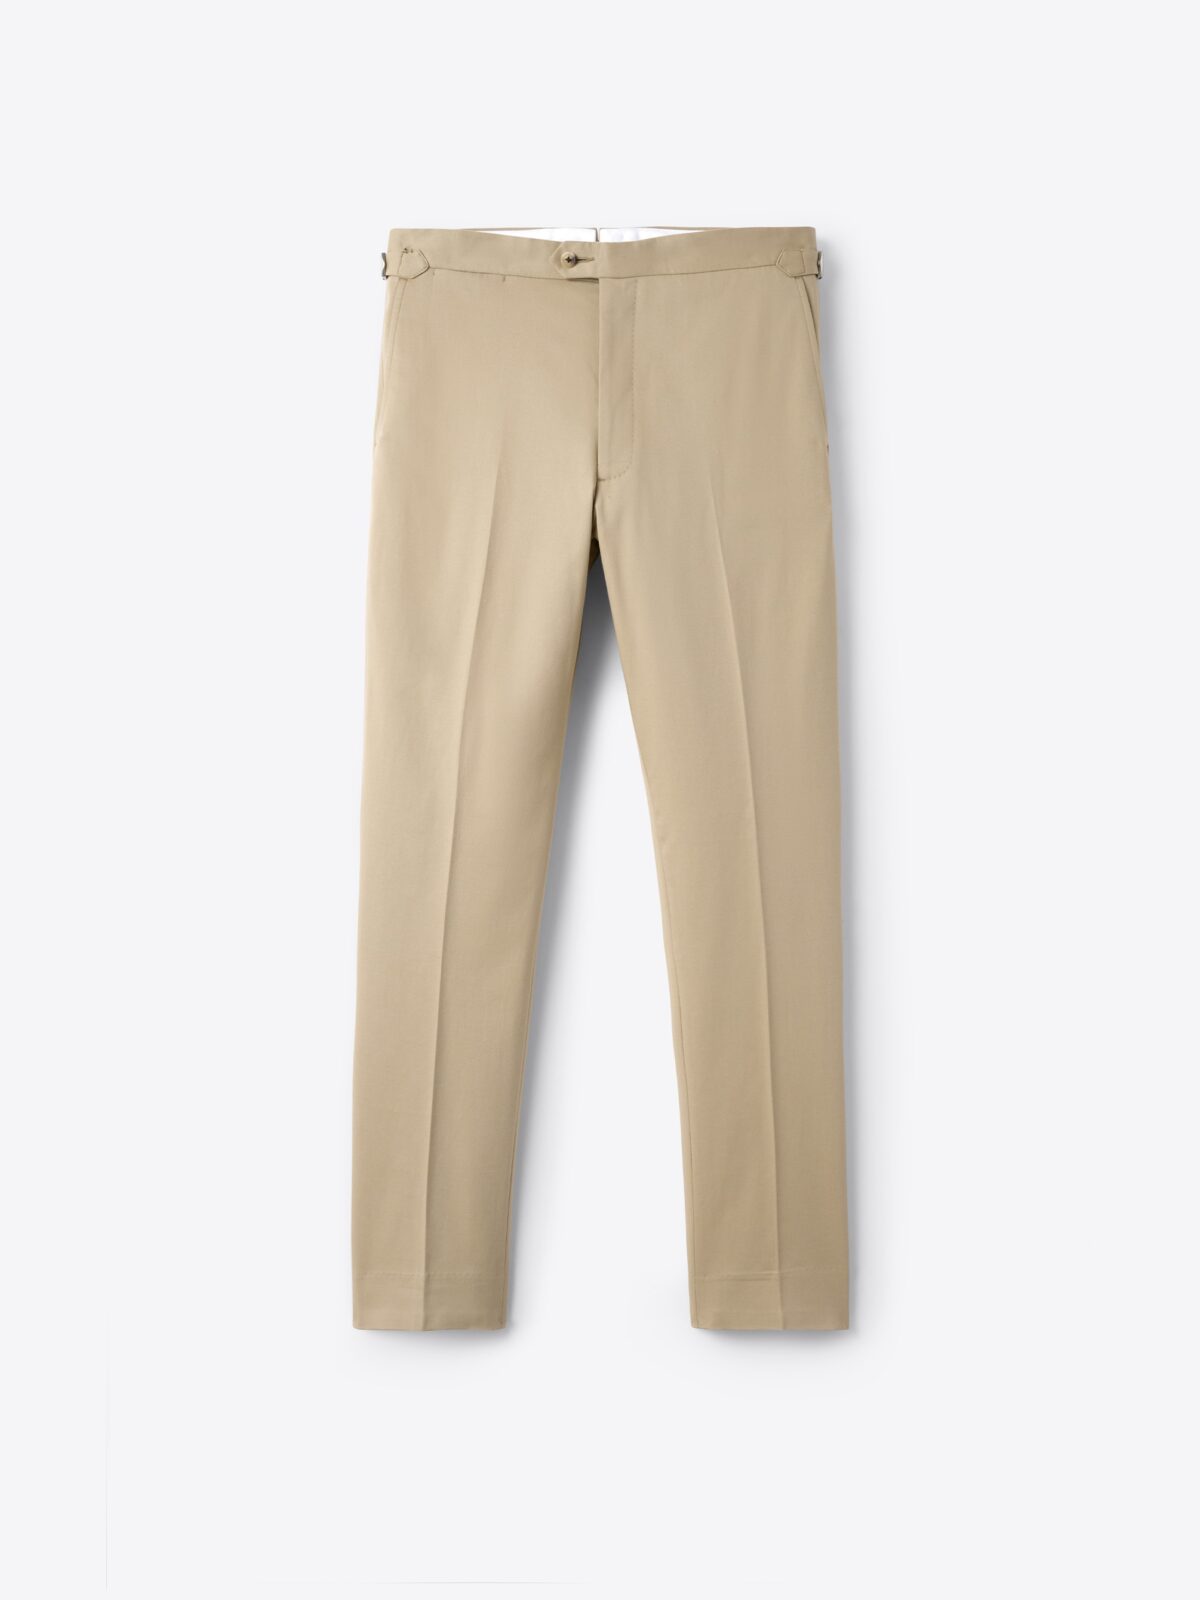 Beige Stretch Cotton Dress Pant - Custom Fit Tailored Clothing